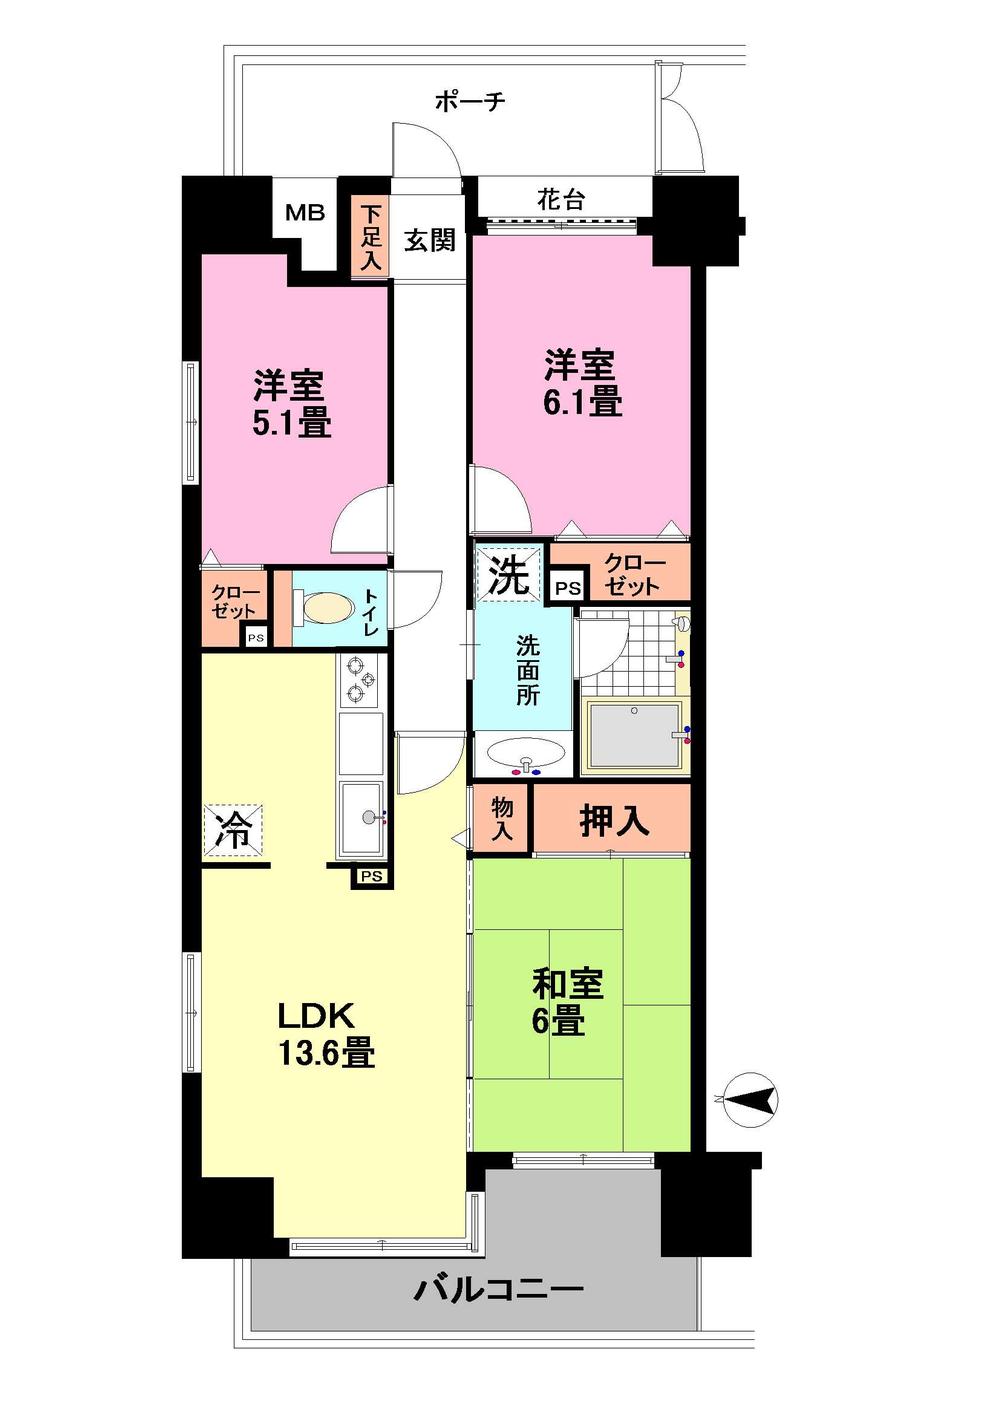 Floor plan. 3LDK, Price 25,900,000 yen, Occupied area 68.87 sq m , Balcony area 8.1 sq m angle dwelling unit With a private porch: 1.32 sq m